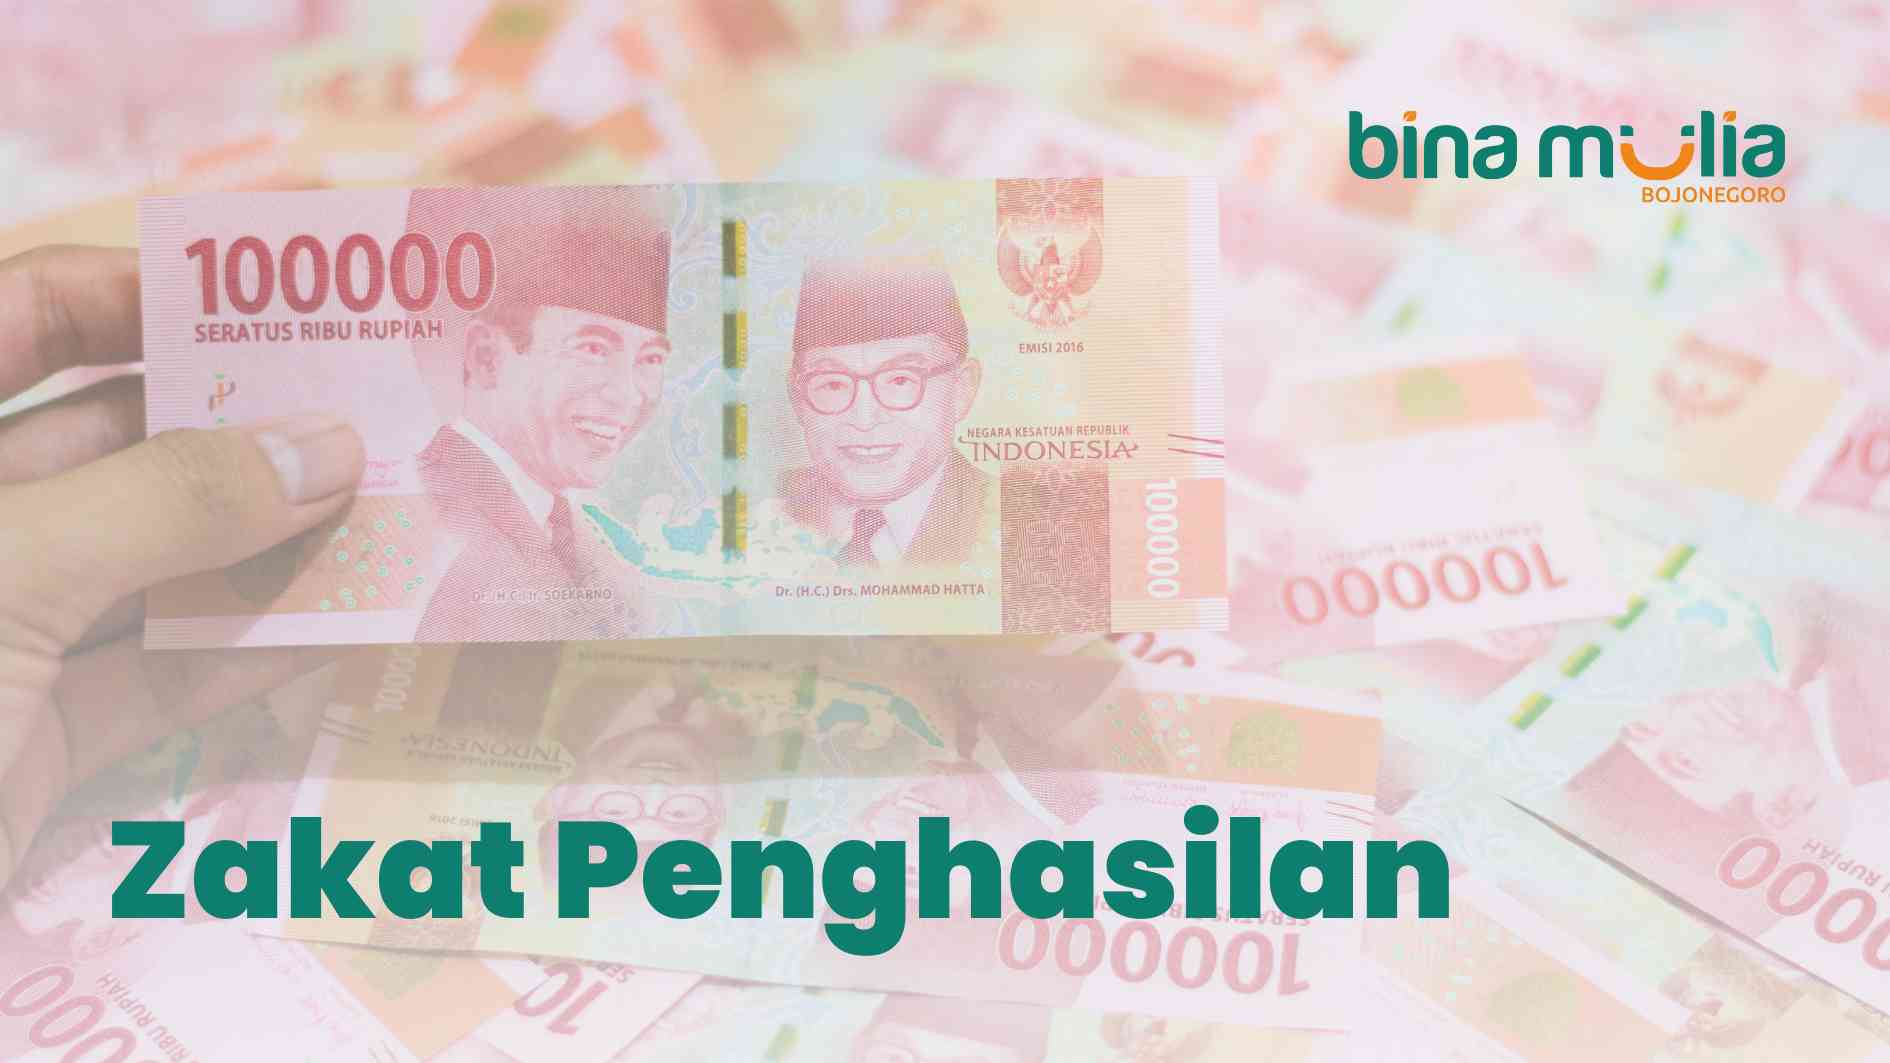  The image shows a pink background with a stack of Indonesian rupiah banknotes and the text "Zakat Penghasilan" (Income Zakat).